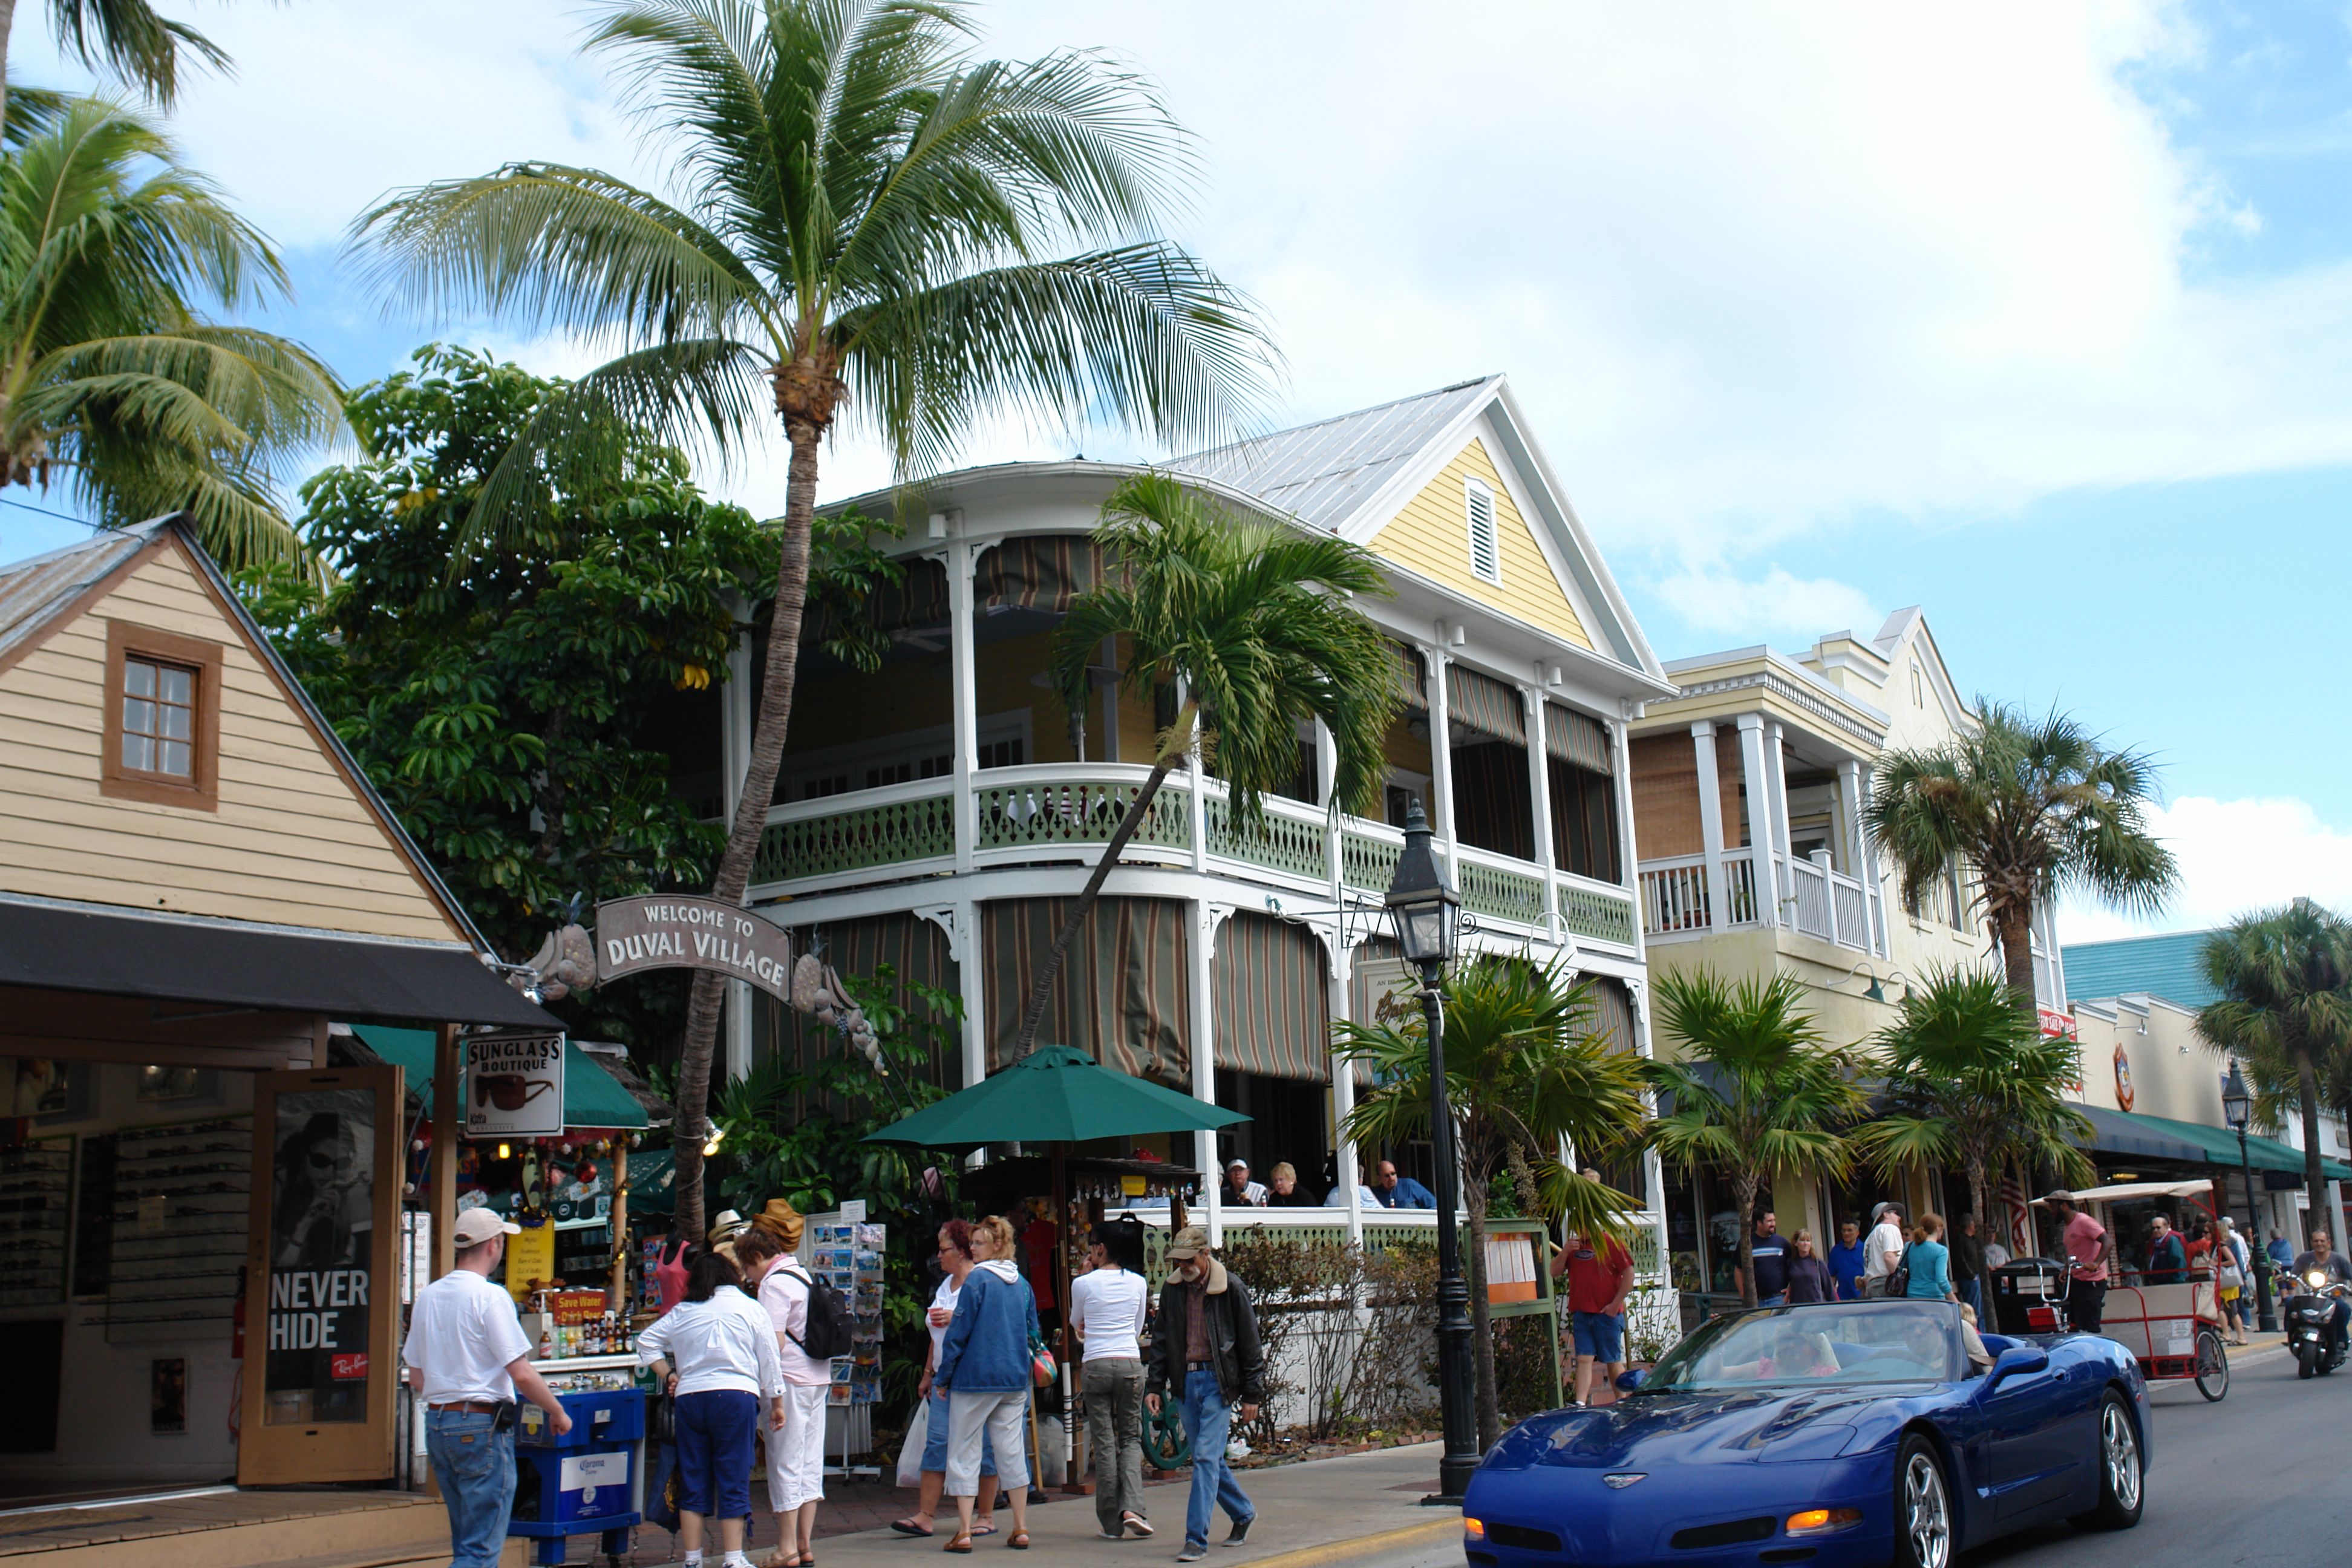 Bachelor Party in Key West? You Must Read This!